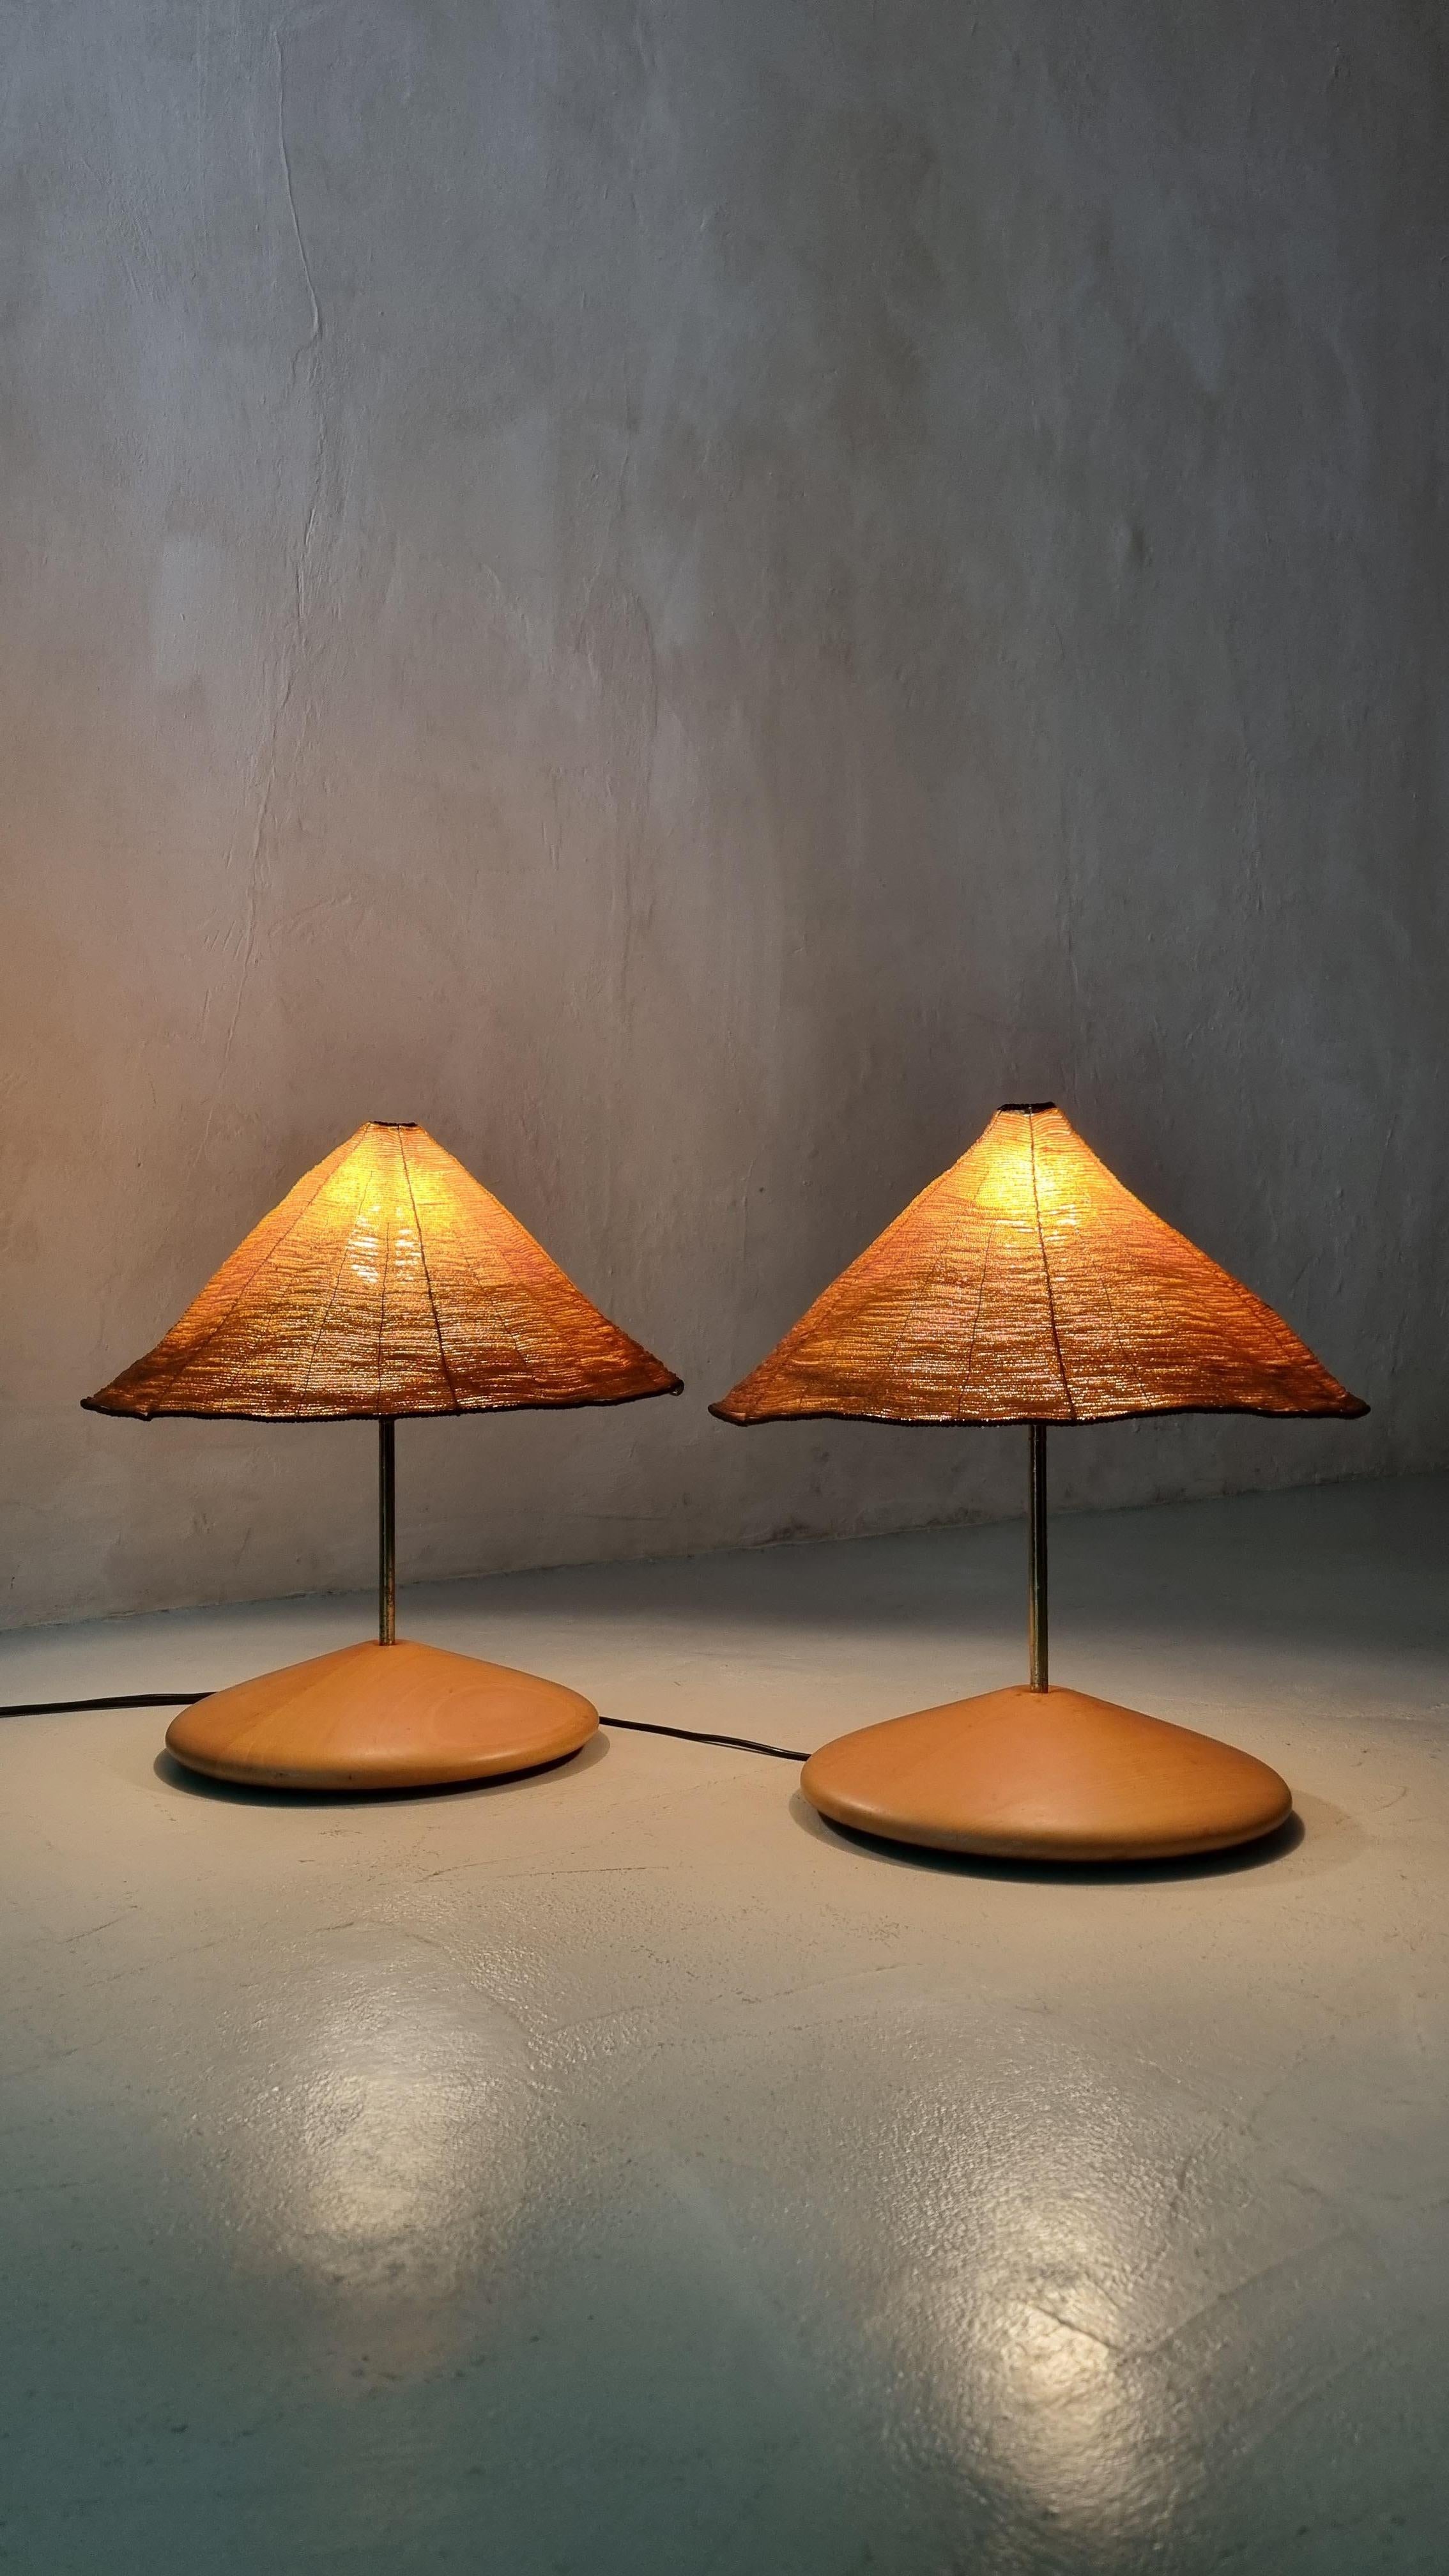 Rare pair of table lamps mod. Sarasar designed by Roberto Pamio and Renato Toso for Leucos in 1975.
Polished wood base, diffusers in colored glass beads, amber and black edge, painted metal structure. This rare pair of lamps was produced only for a